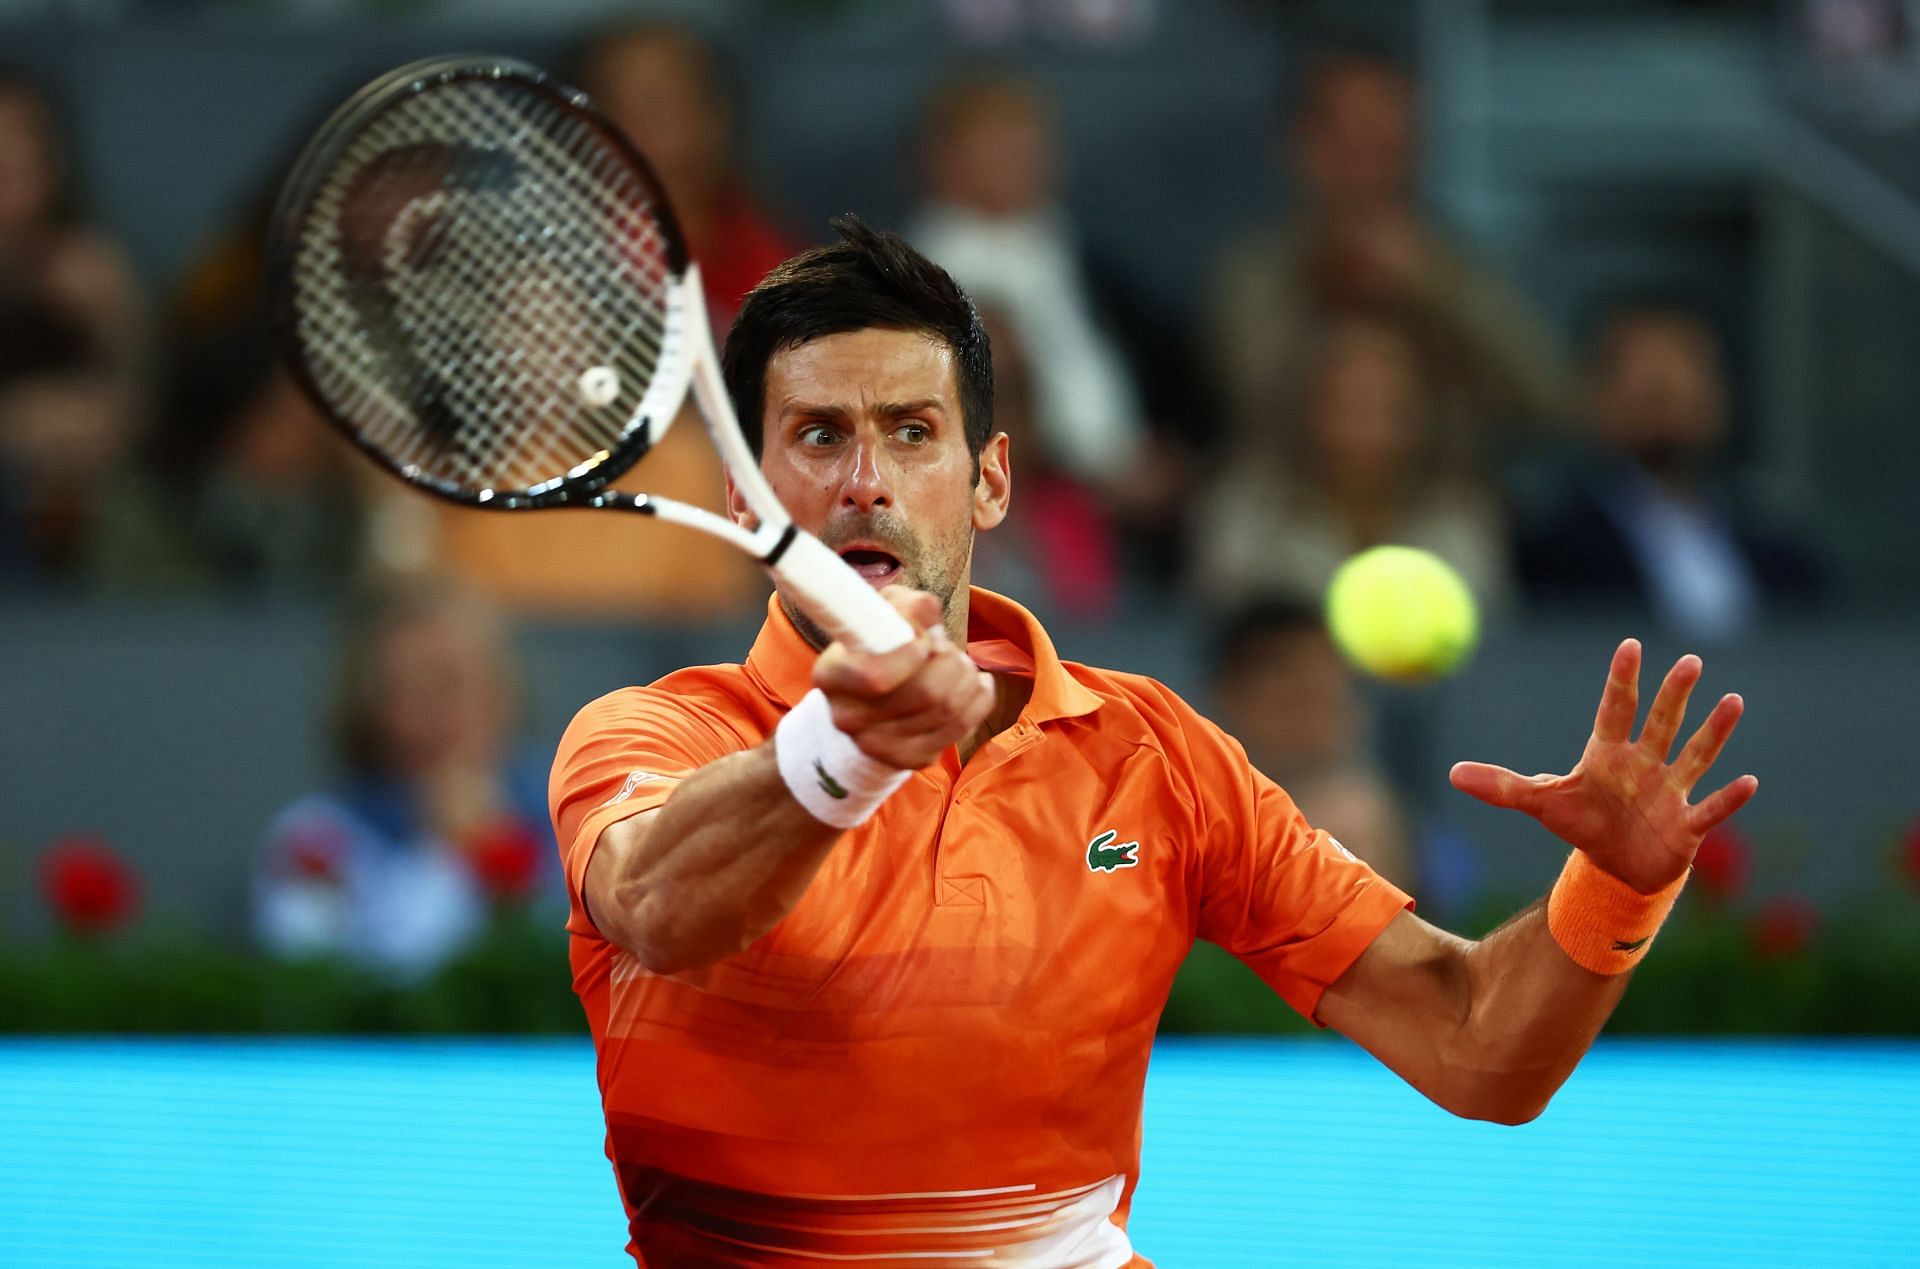 Novak Djokovic extended his flawless record over Gael Monfils to 18-0 as he beat the Frenchman in their second-round encounter in Madrid.